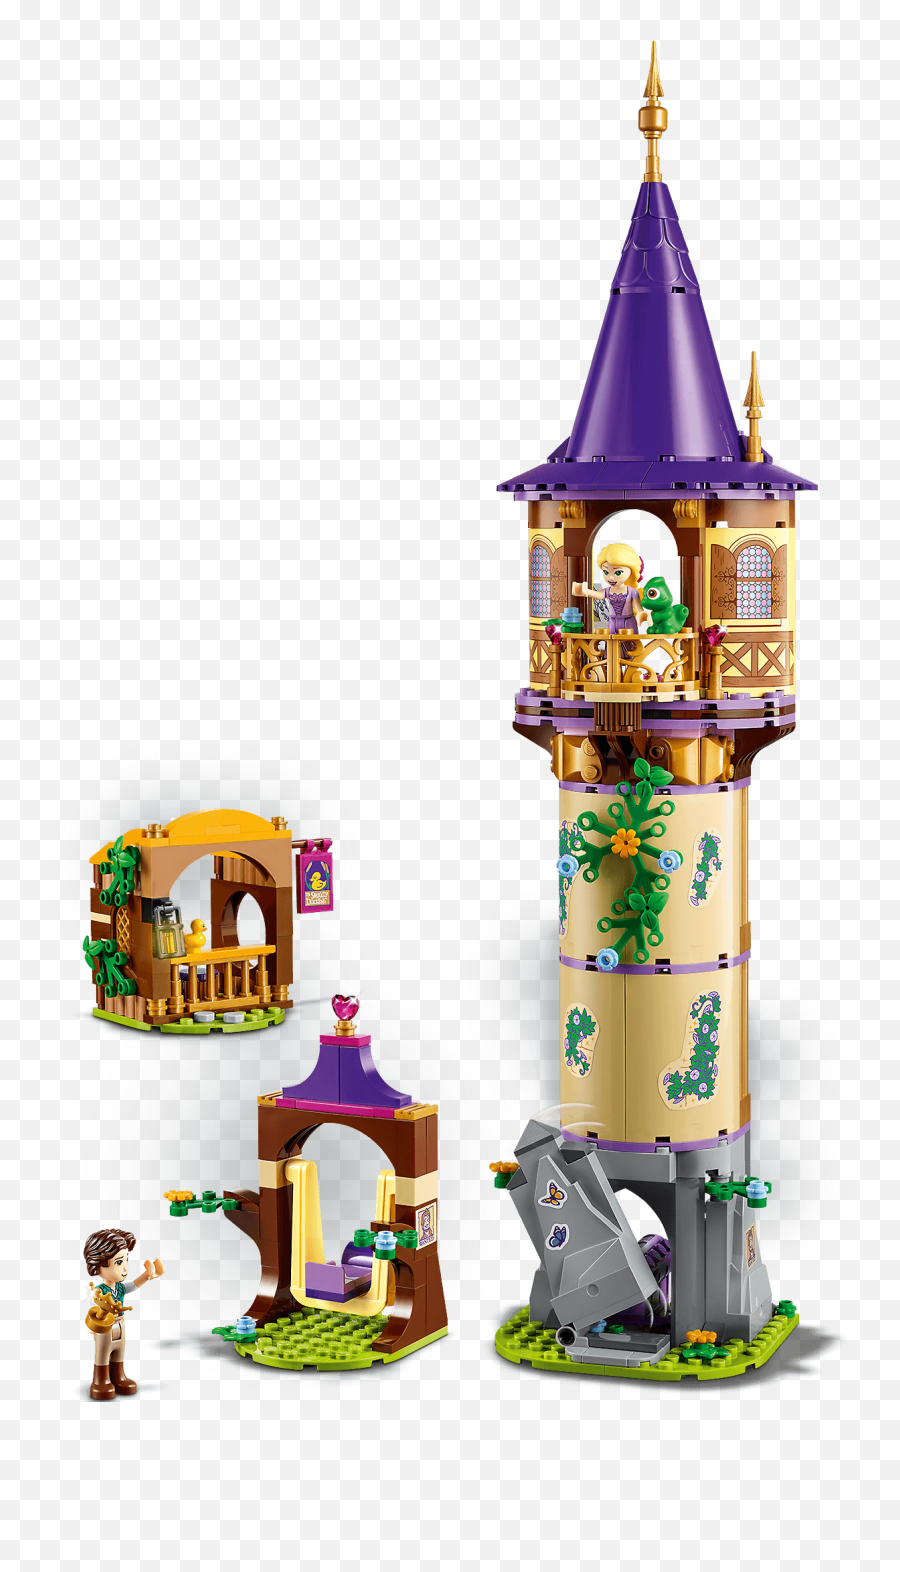 Rapunzelu0027s Tower - Lego Rapunzel Tower Emoji,Rapunzel Coming Out Of Tower With Emotions